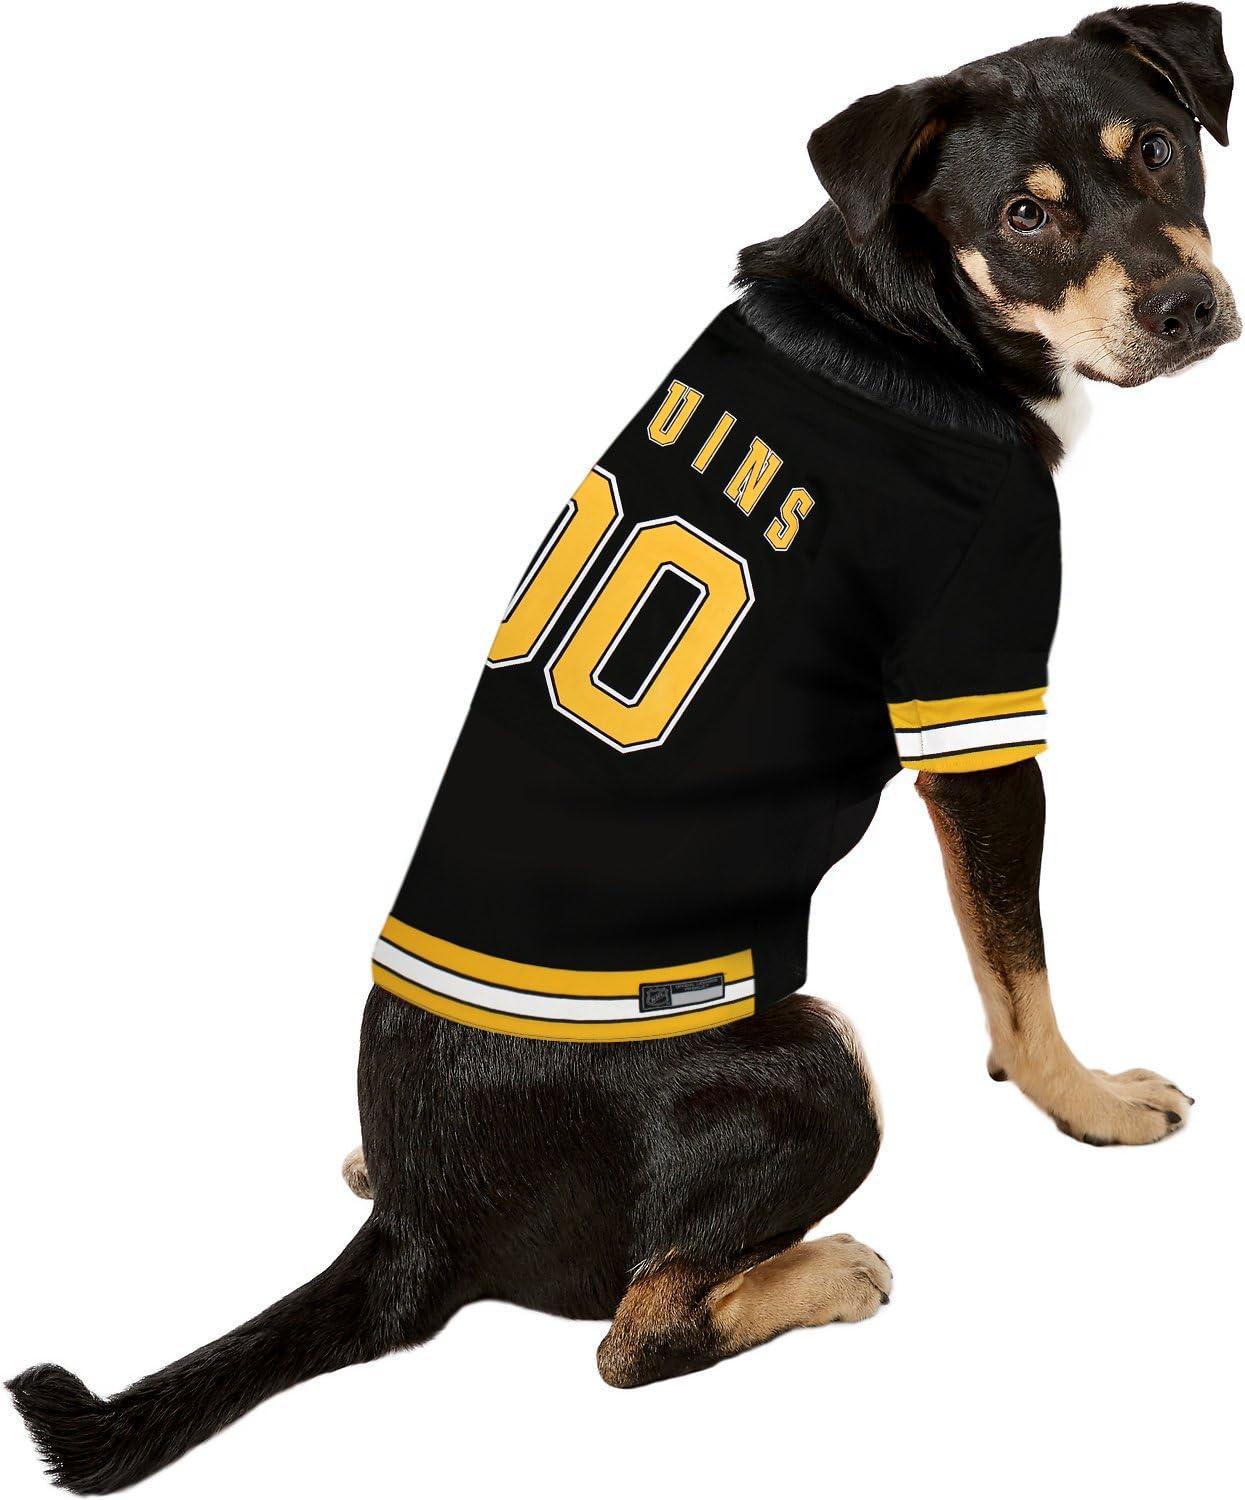 NHL Boston Bruins Jersey for Dogs & Cats, Medium. - Let Your Pet